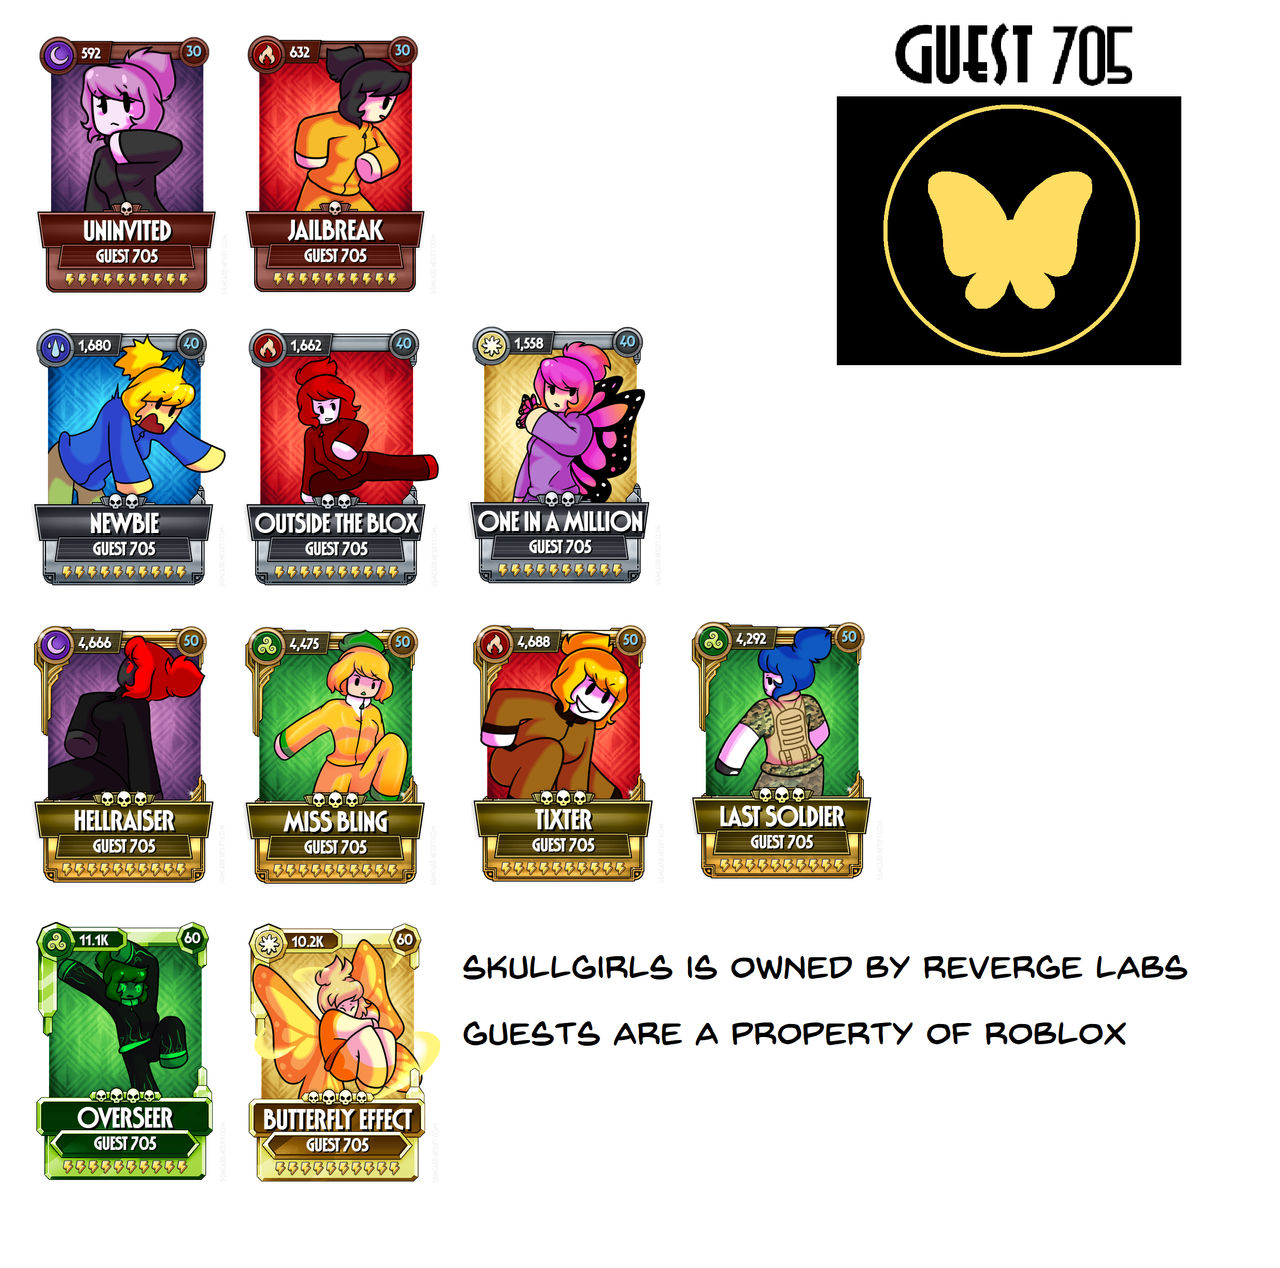 Skullgirls Mobile Custom Cards With My Guestsona By Guest705132 On Deviantart - roblox azure mines ambrosia